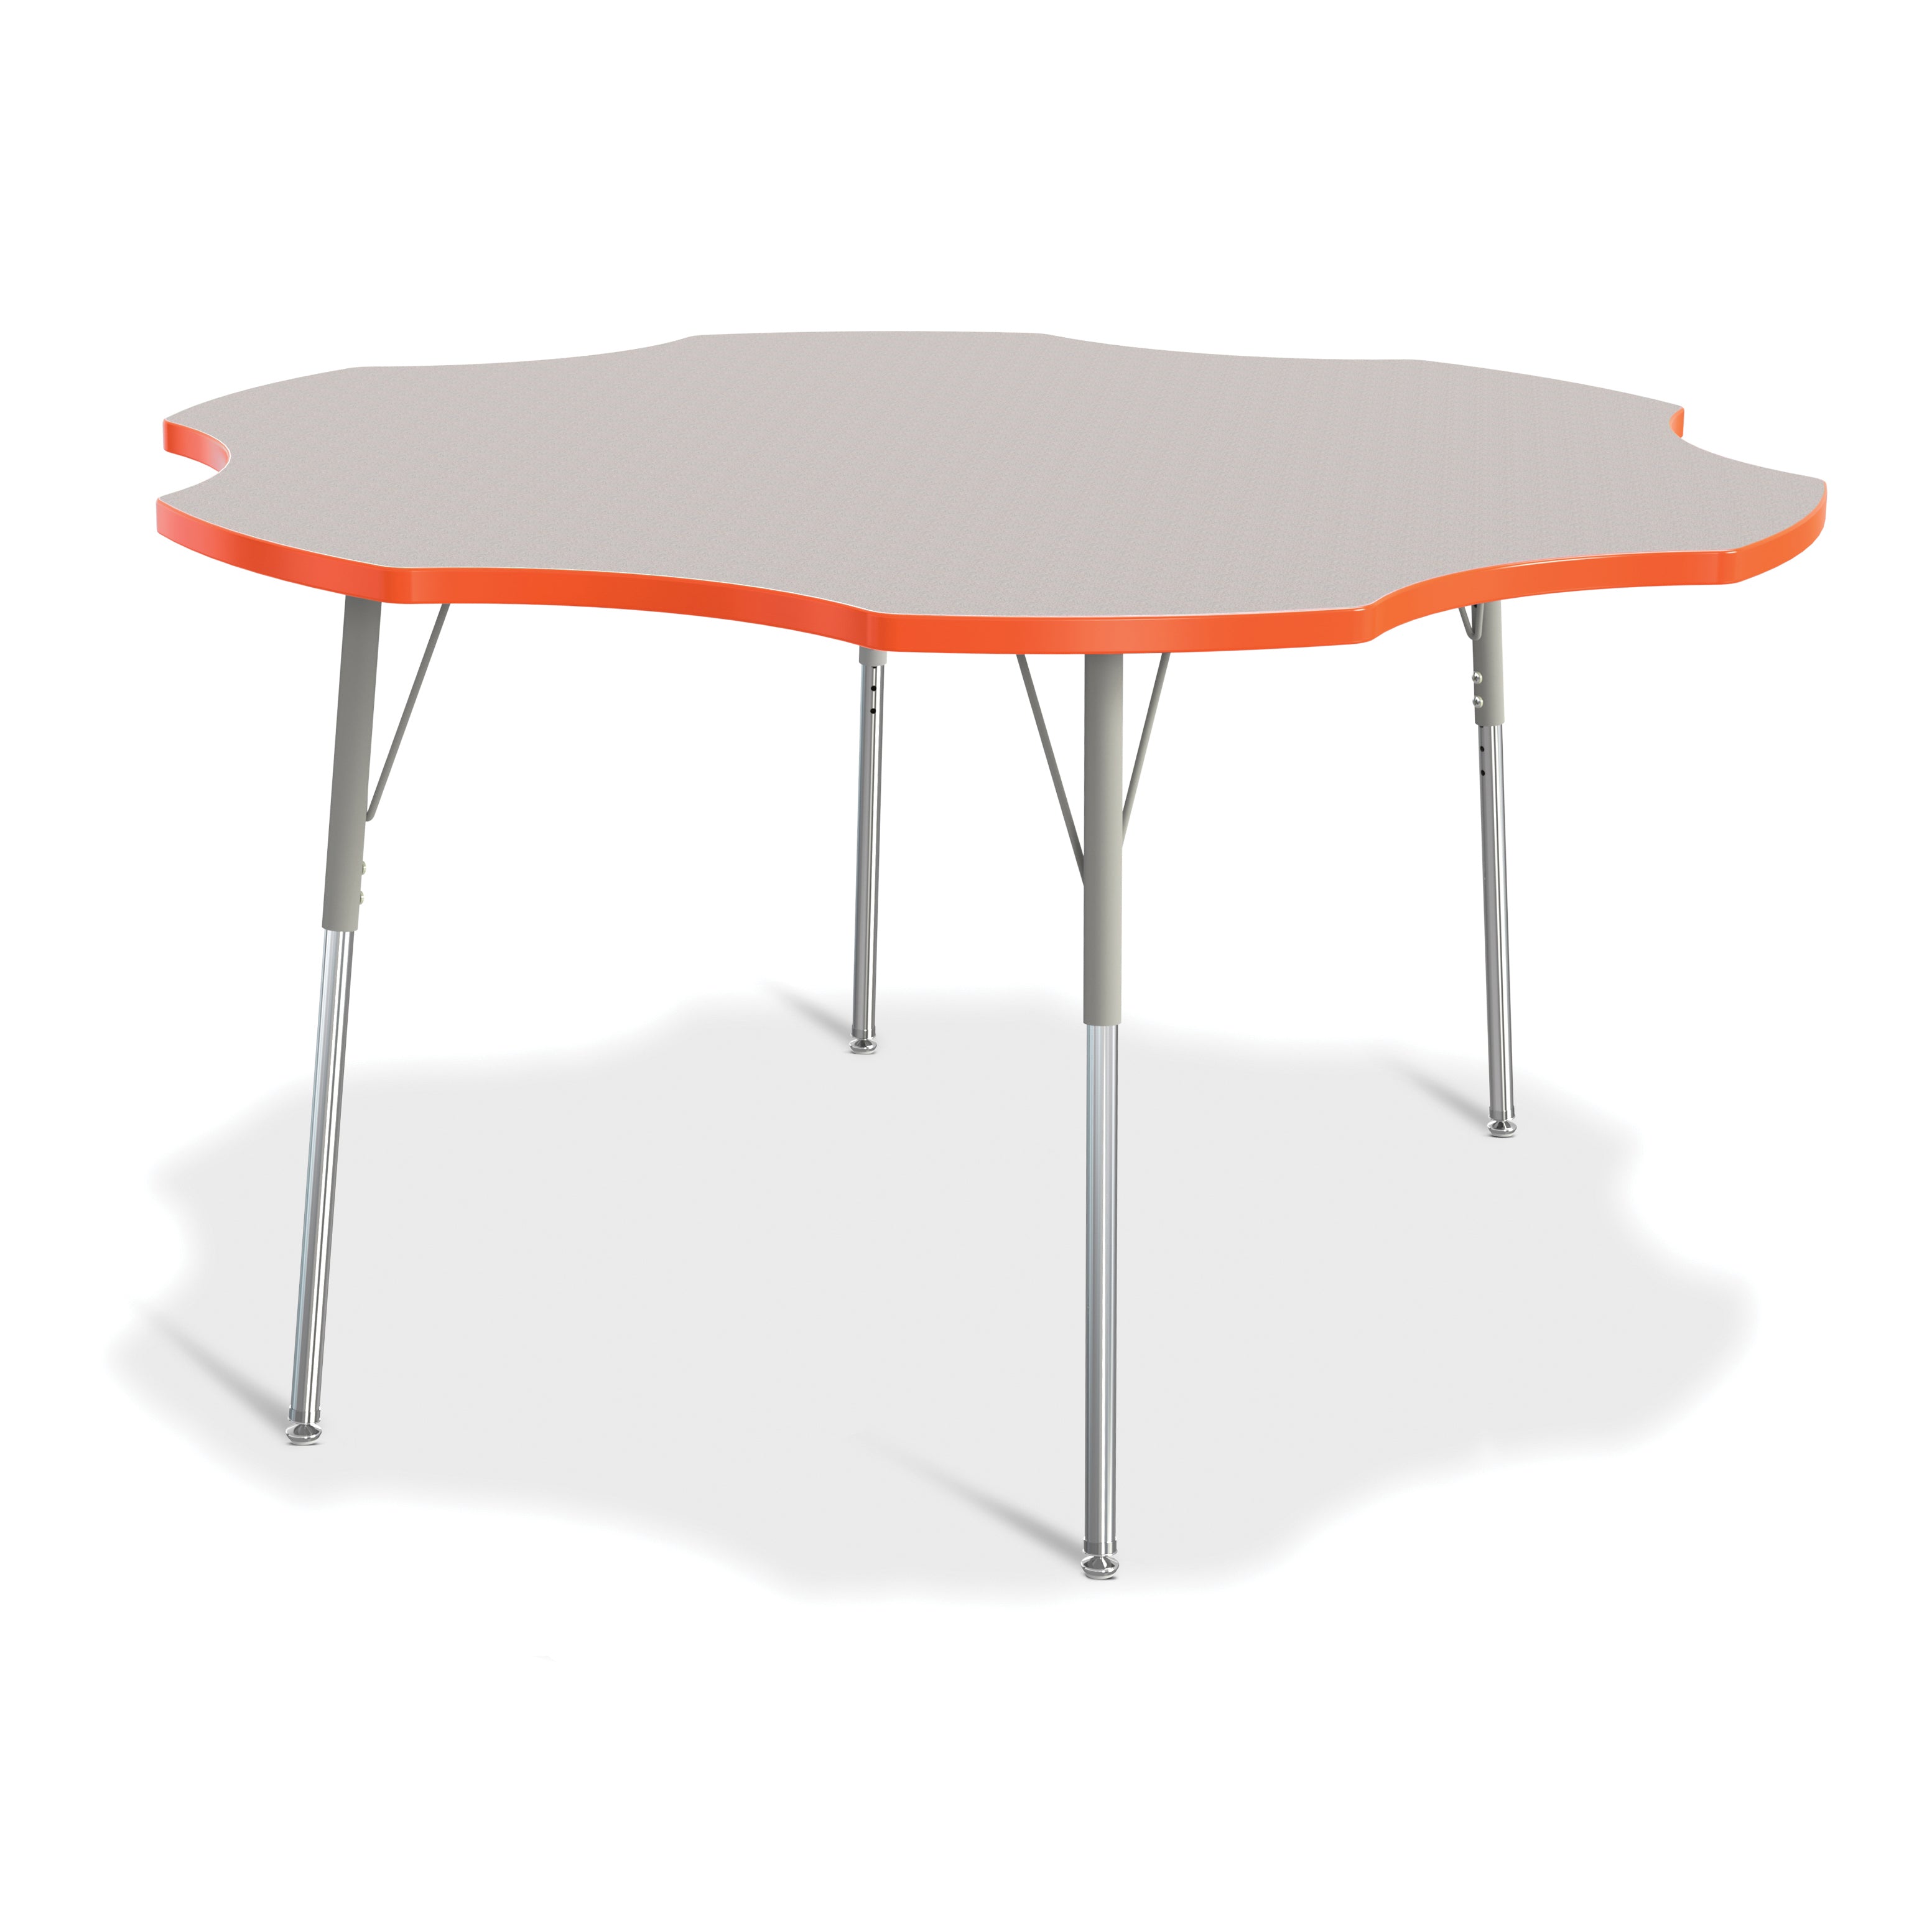 6458JCA114, Berries Six Leaf Activity Table - 60", A-height - Freckled Gray/Orange/Gray